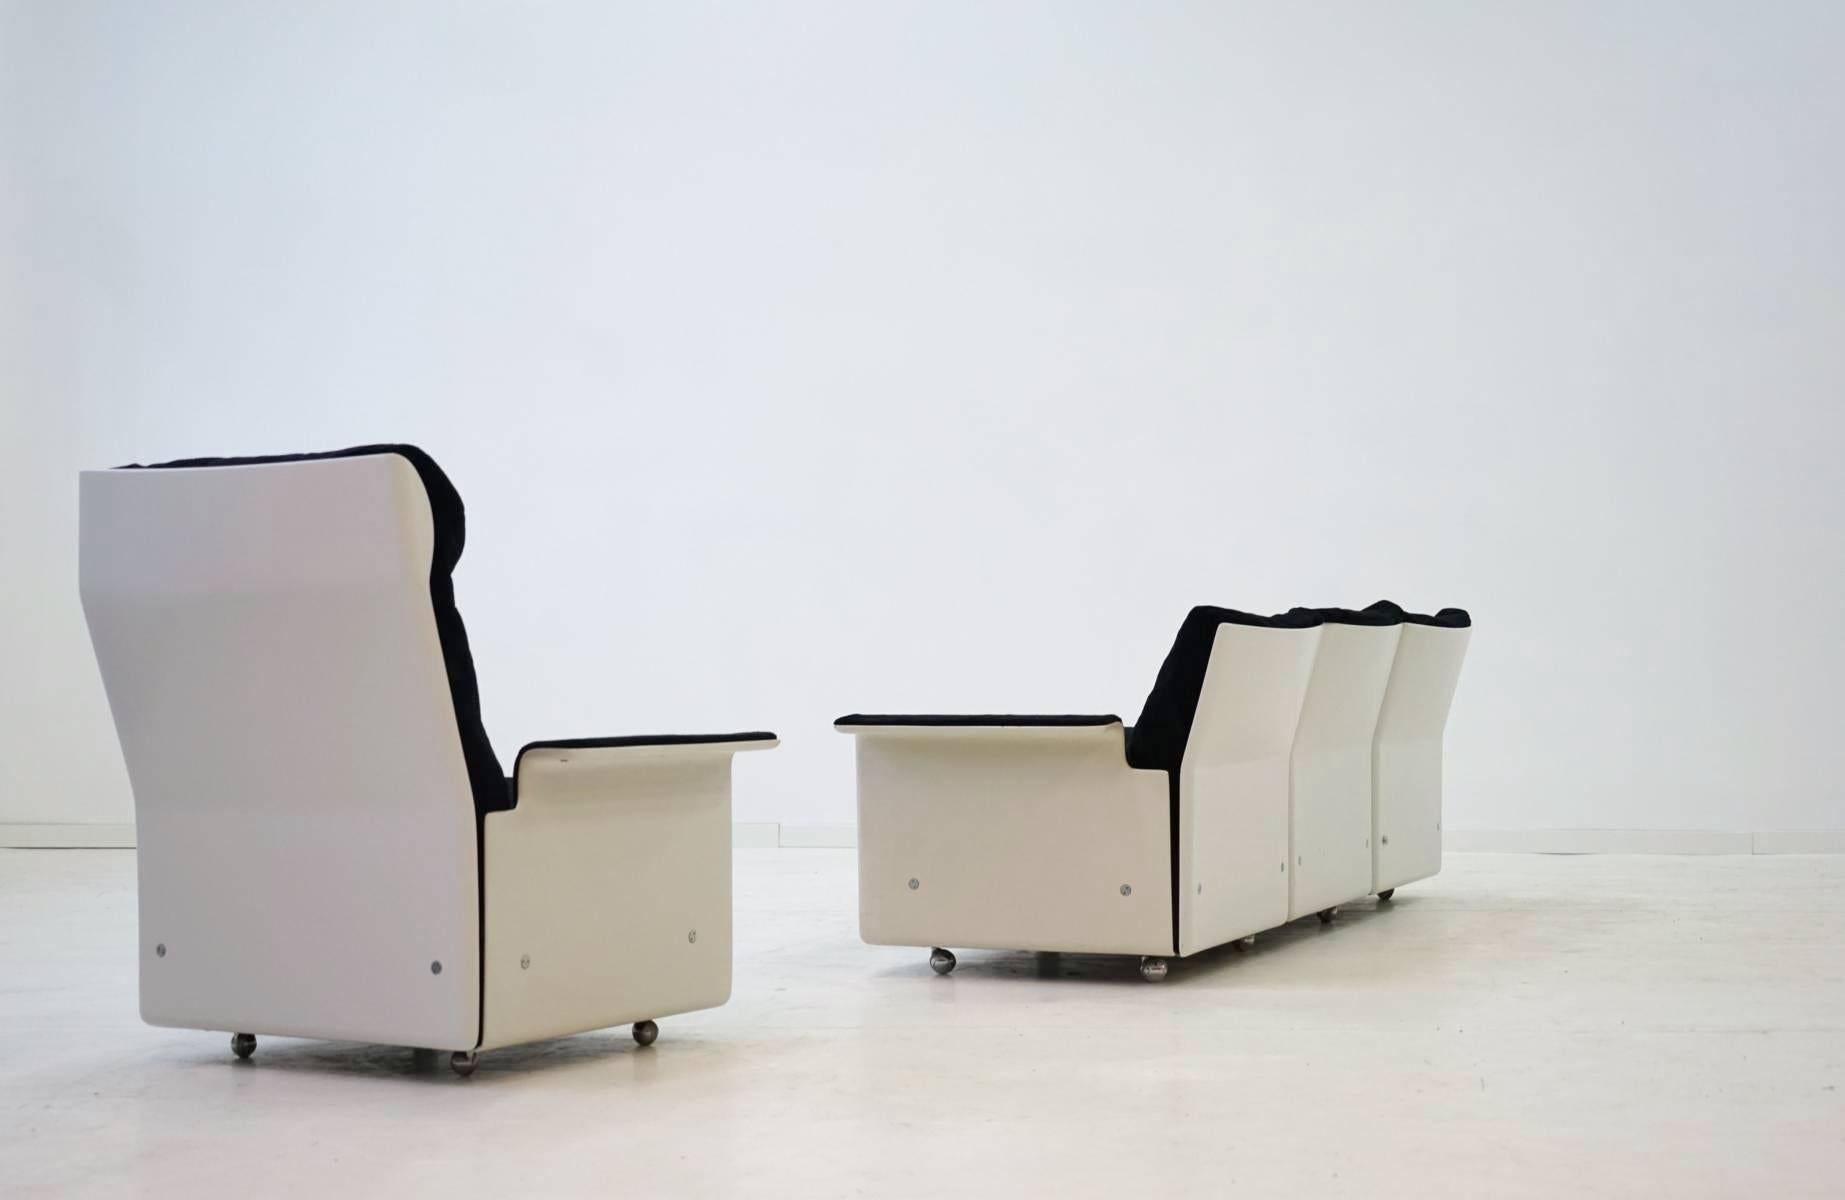 Three-Seat Sofa and Armchairs by Dieter Rams for Vitsoe, RZ 62 620 1